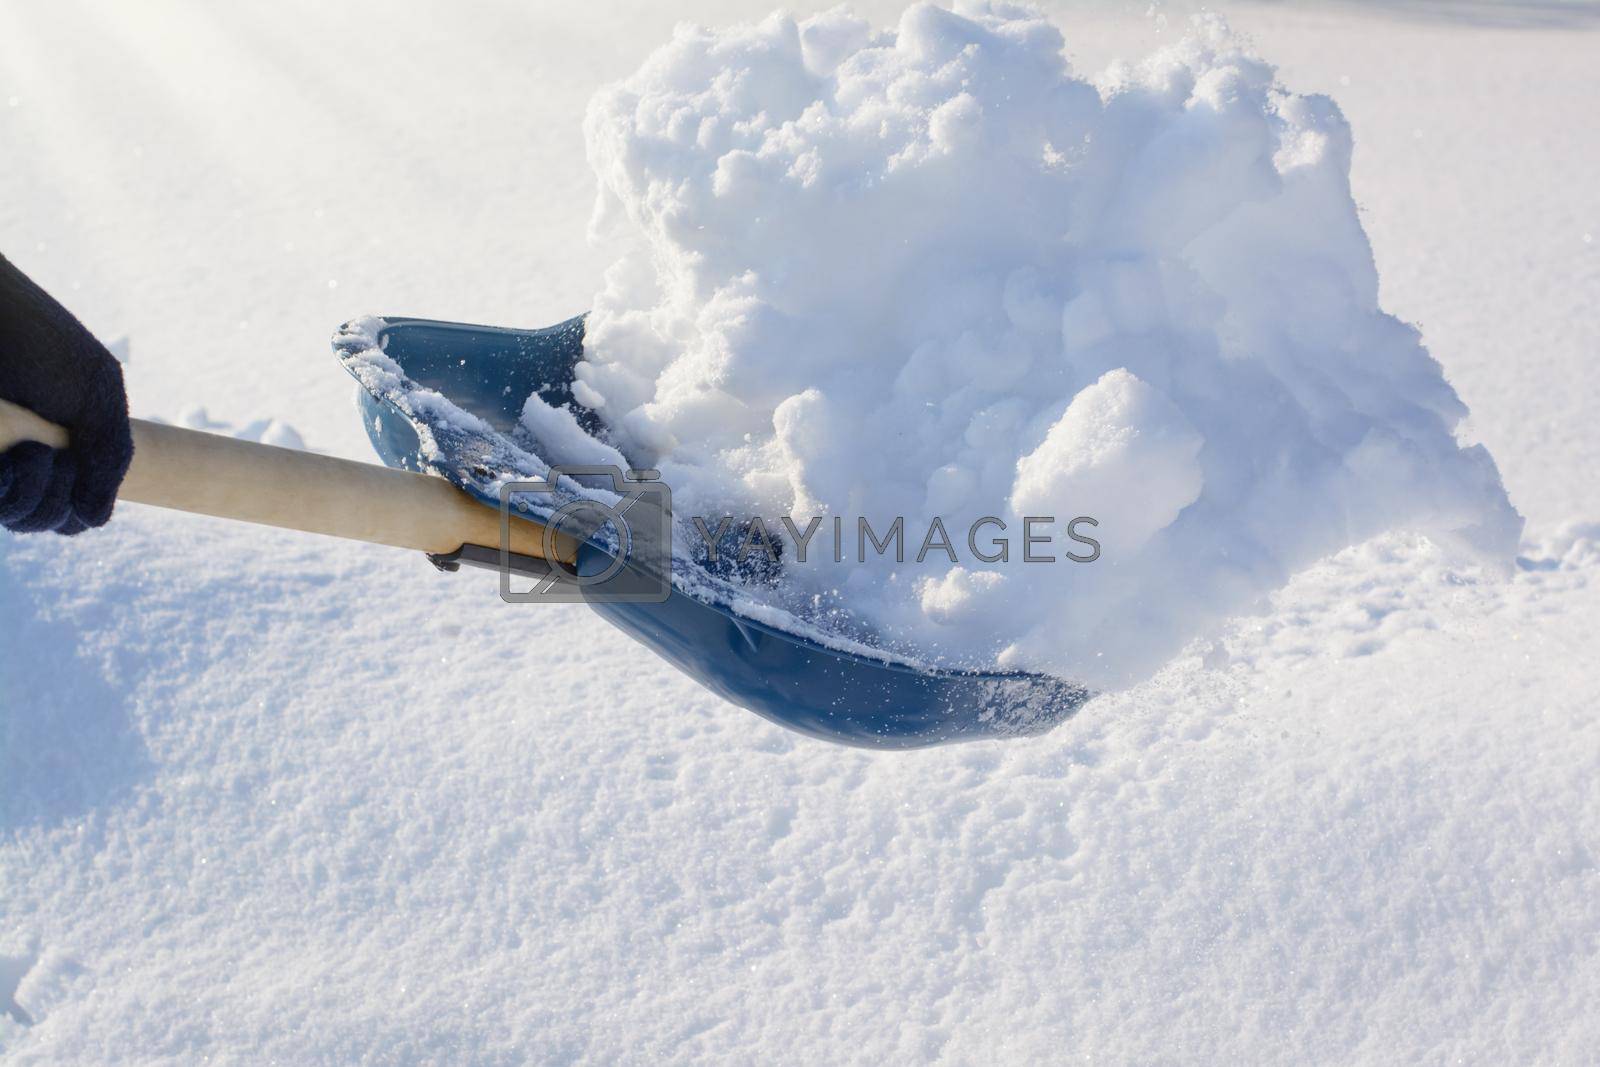 Royalty free image of Removing shovel with snow by VitaliiPetrushenko